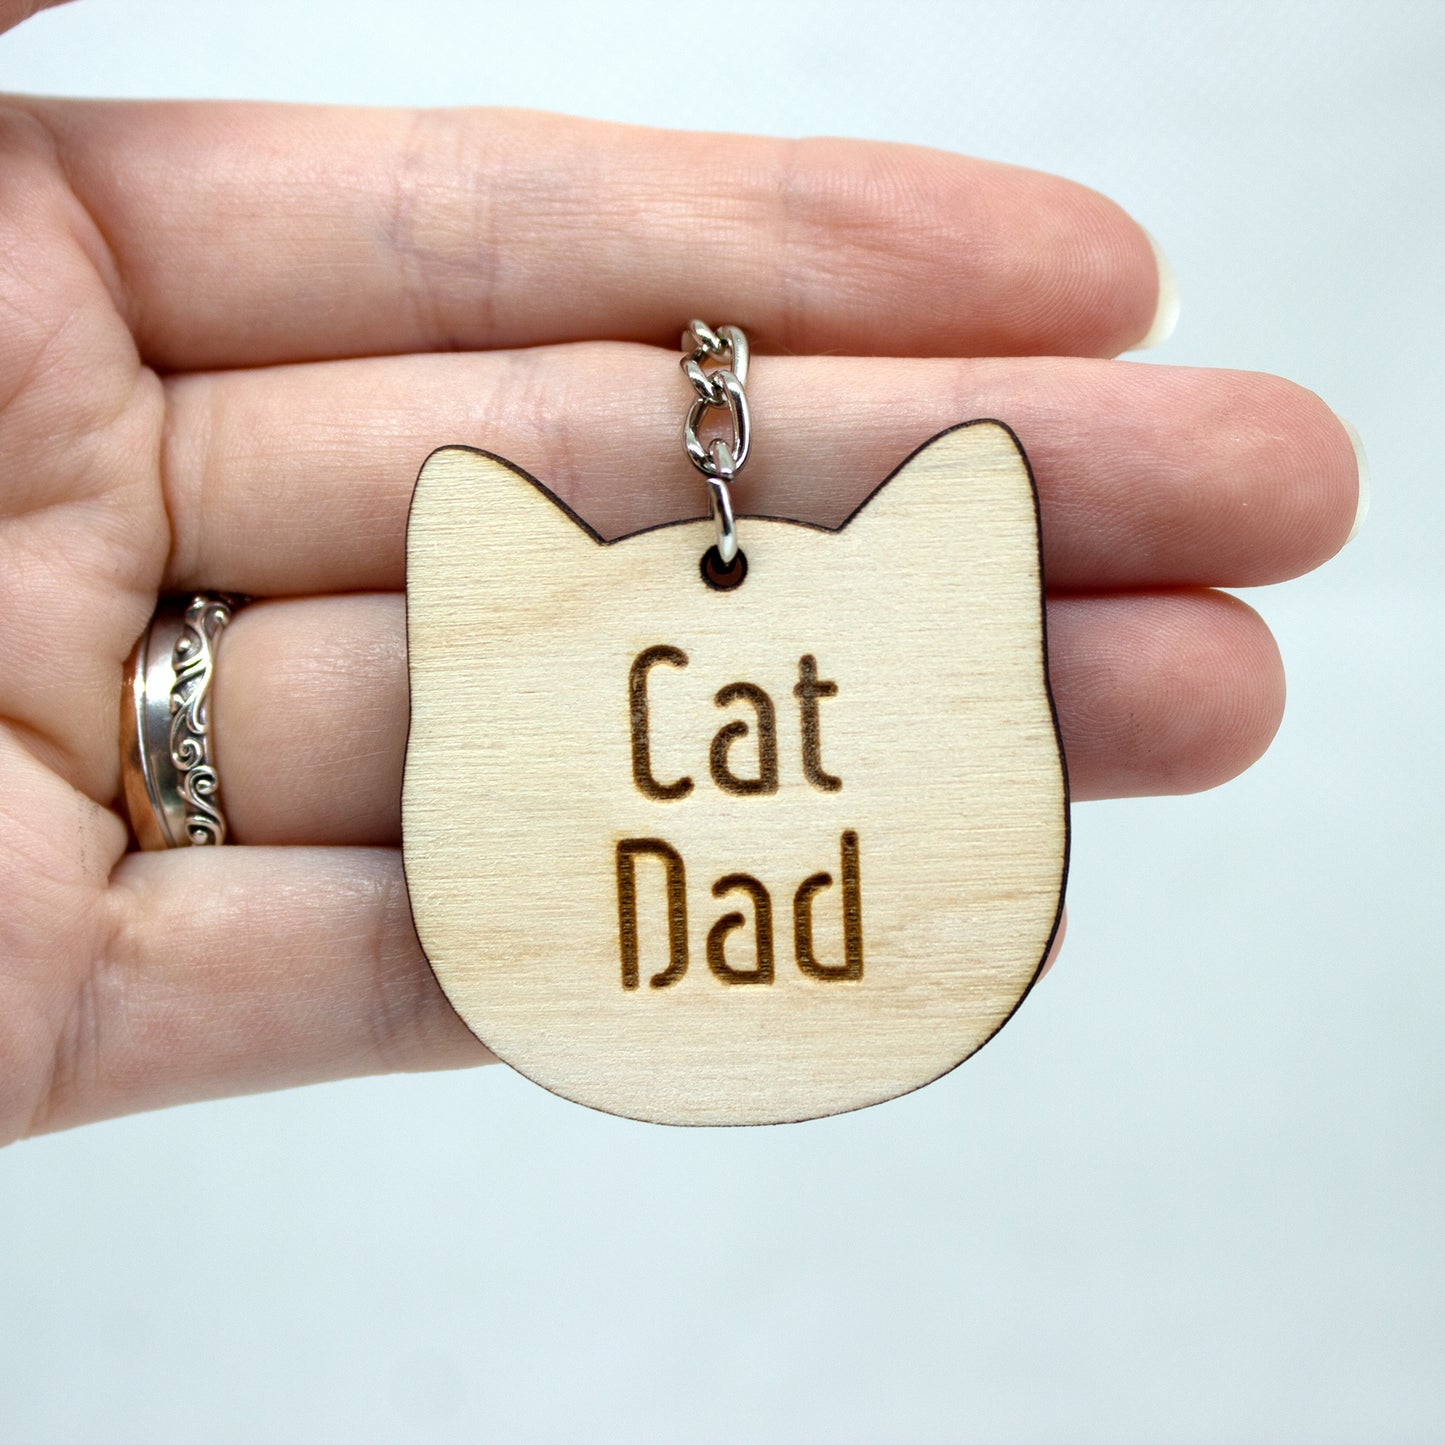 Cat Dad Keyring, Cat Owner Keychain, New Kitten Gift, Rescue Cat, Love From The Cat